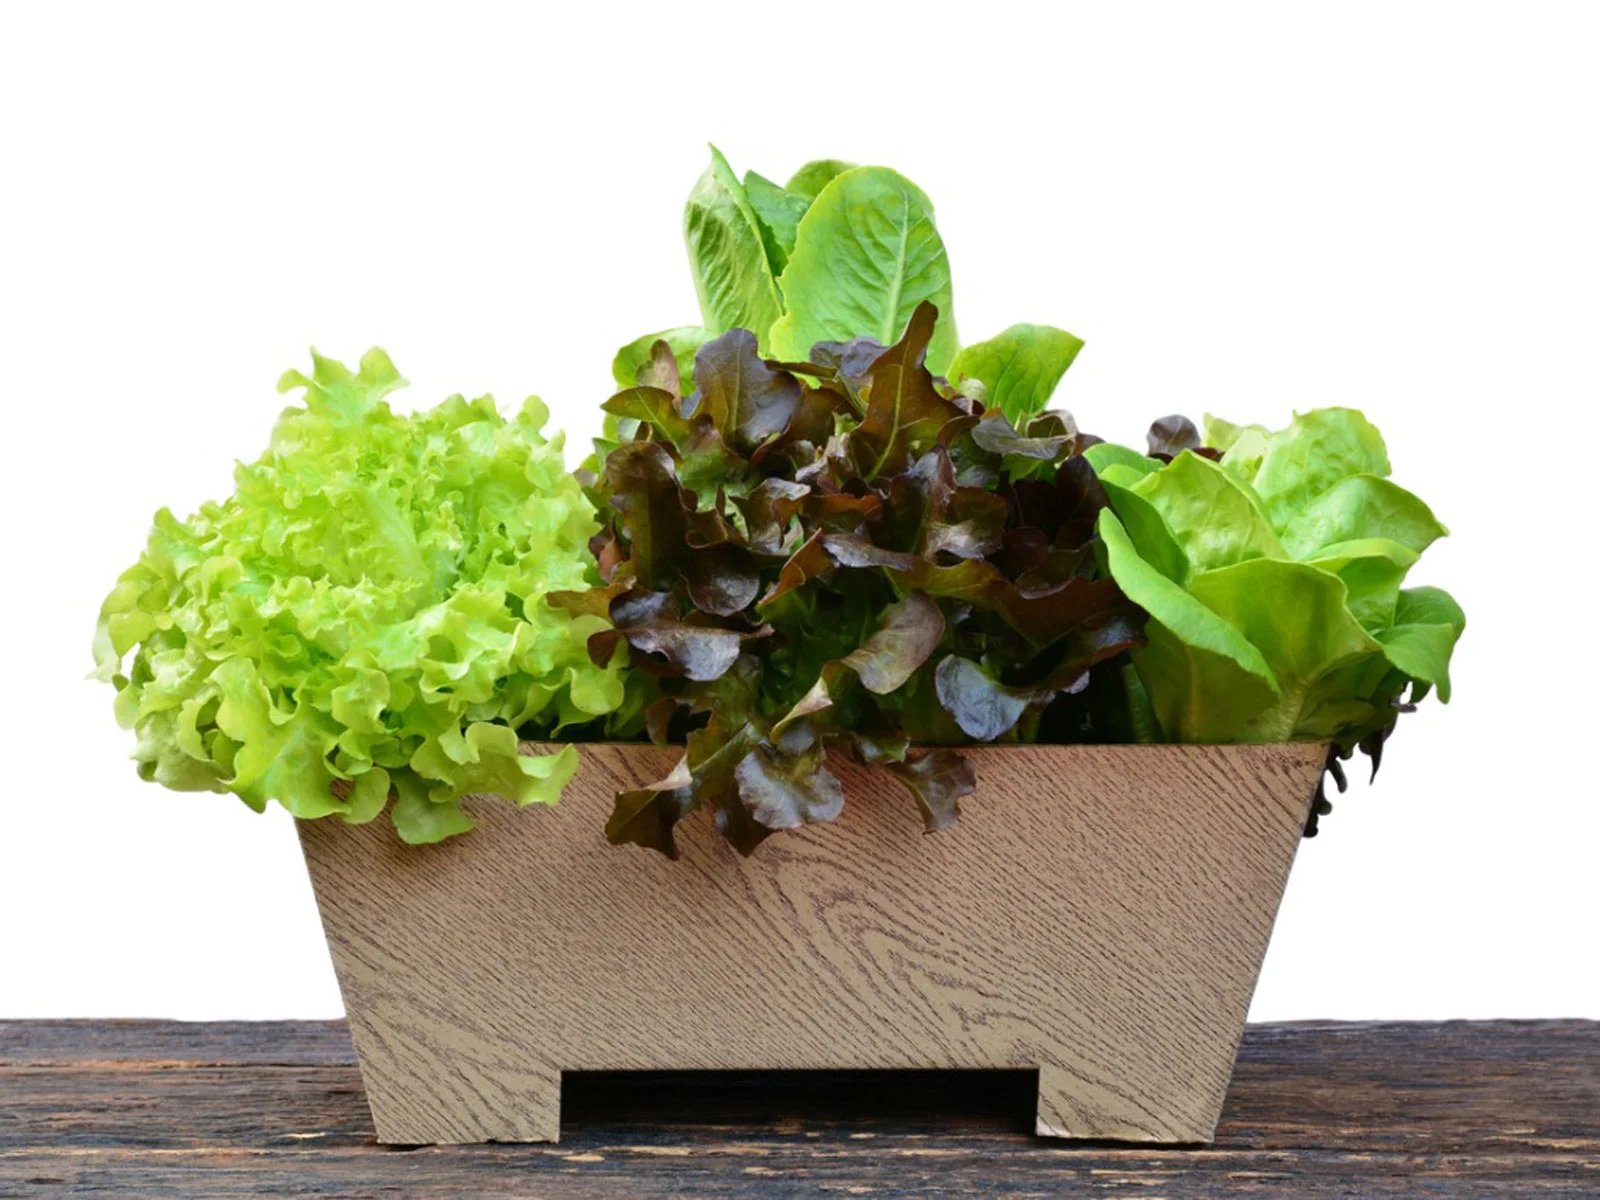 How To Plant Lettuce In Pots